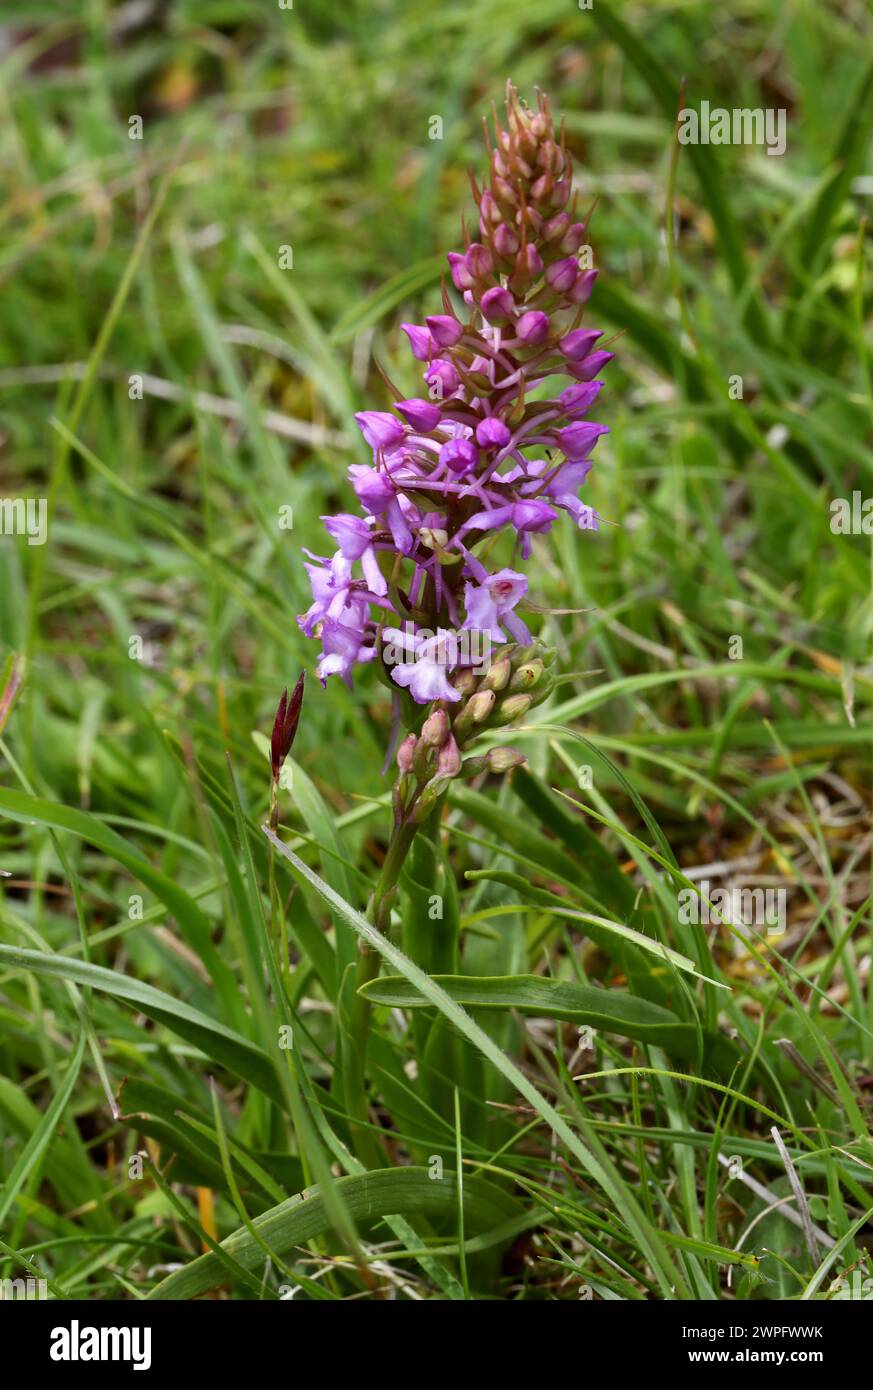 Fragrant Orchid, Gymnadenia conopsea, Orchidaceae. Aston Clinton, Buckinghamshire. Gymnadenia conopsea, commonly known as the fragrant orchid or chalk Stock Photo